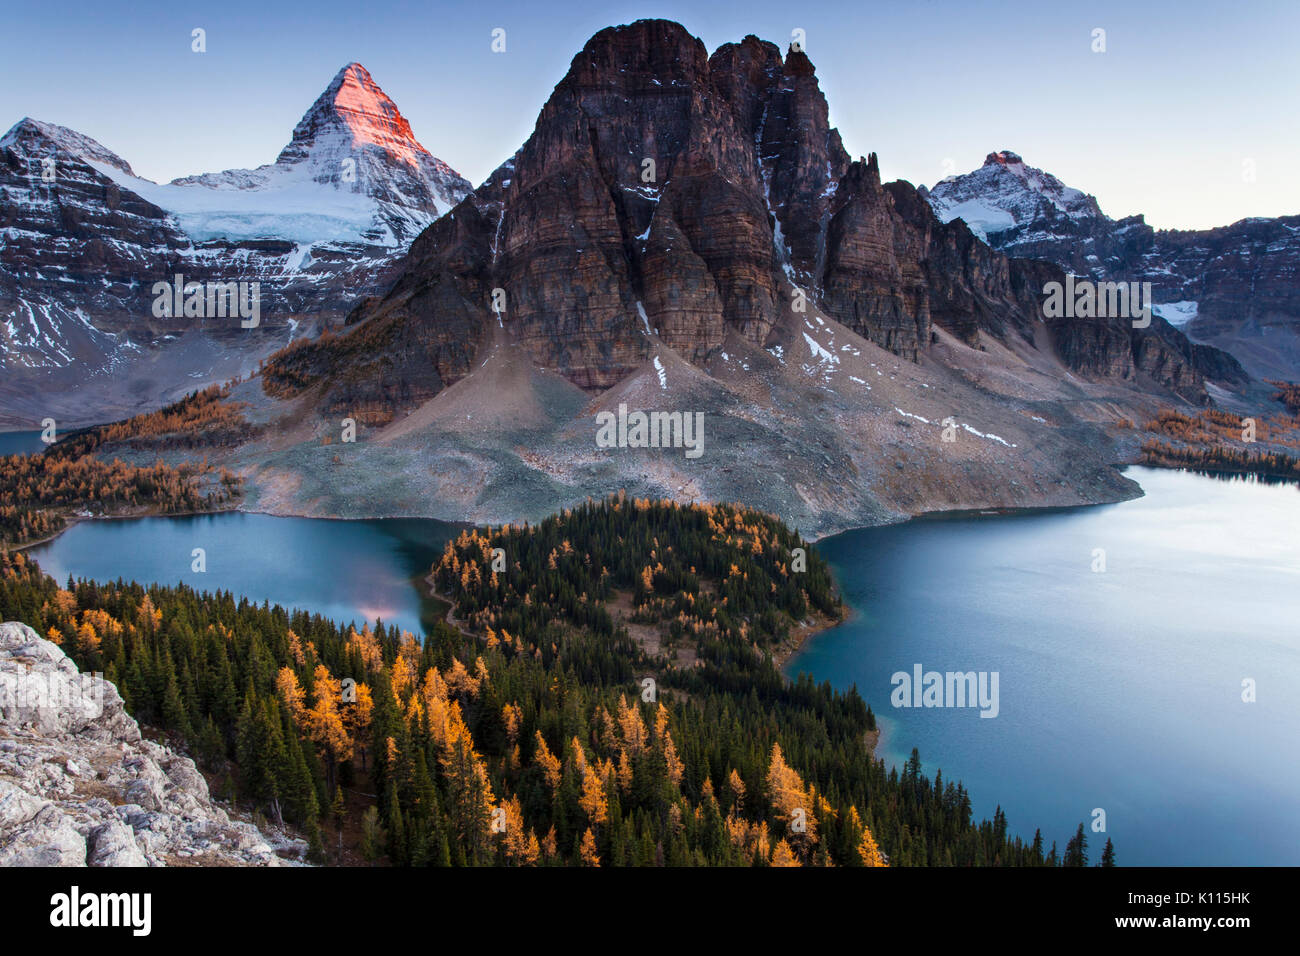 Mount Assiniboine, Sunburst Lake and Cerulean Lake from the flanks of Nub Peak in Mount Assiniboine Provincial Park, Rocky Mountains, British Columbia Stock Photo